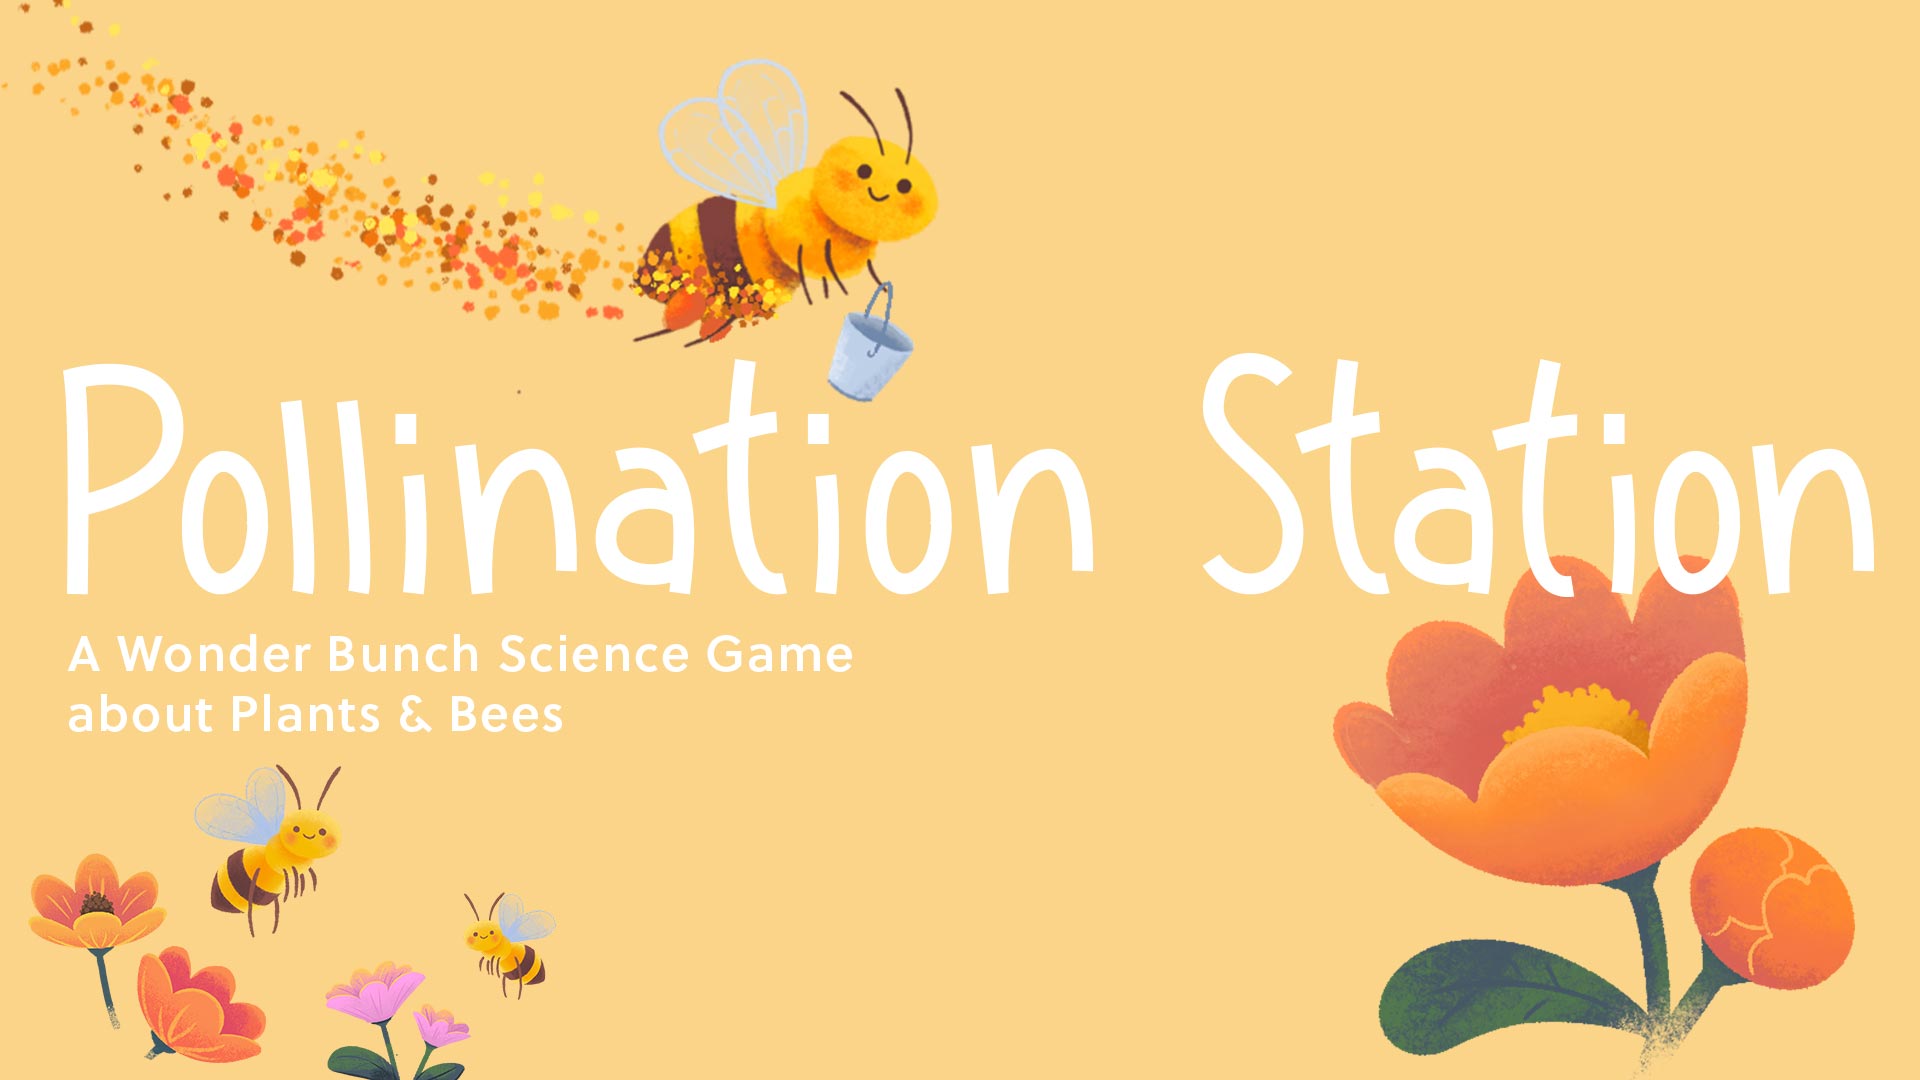 Pollination Station - A Wonder Bunch Science Game about Plants and Bees